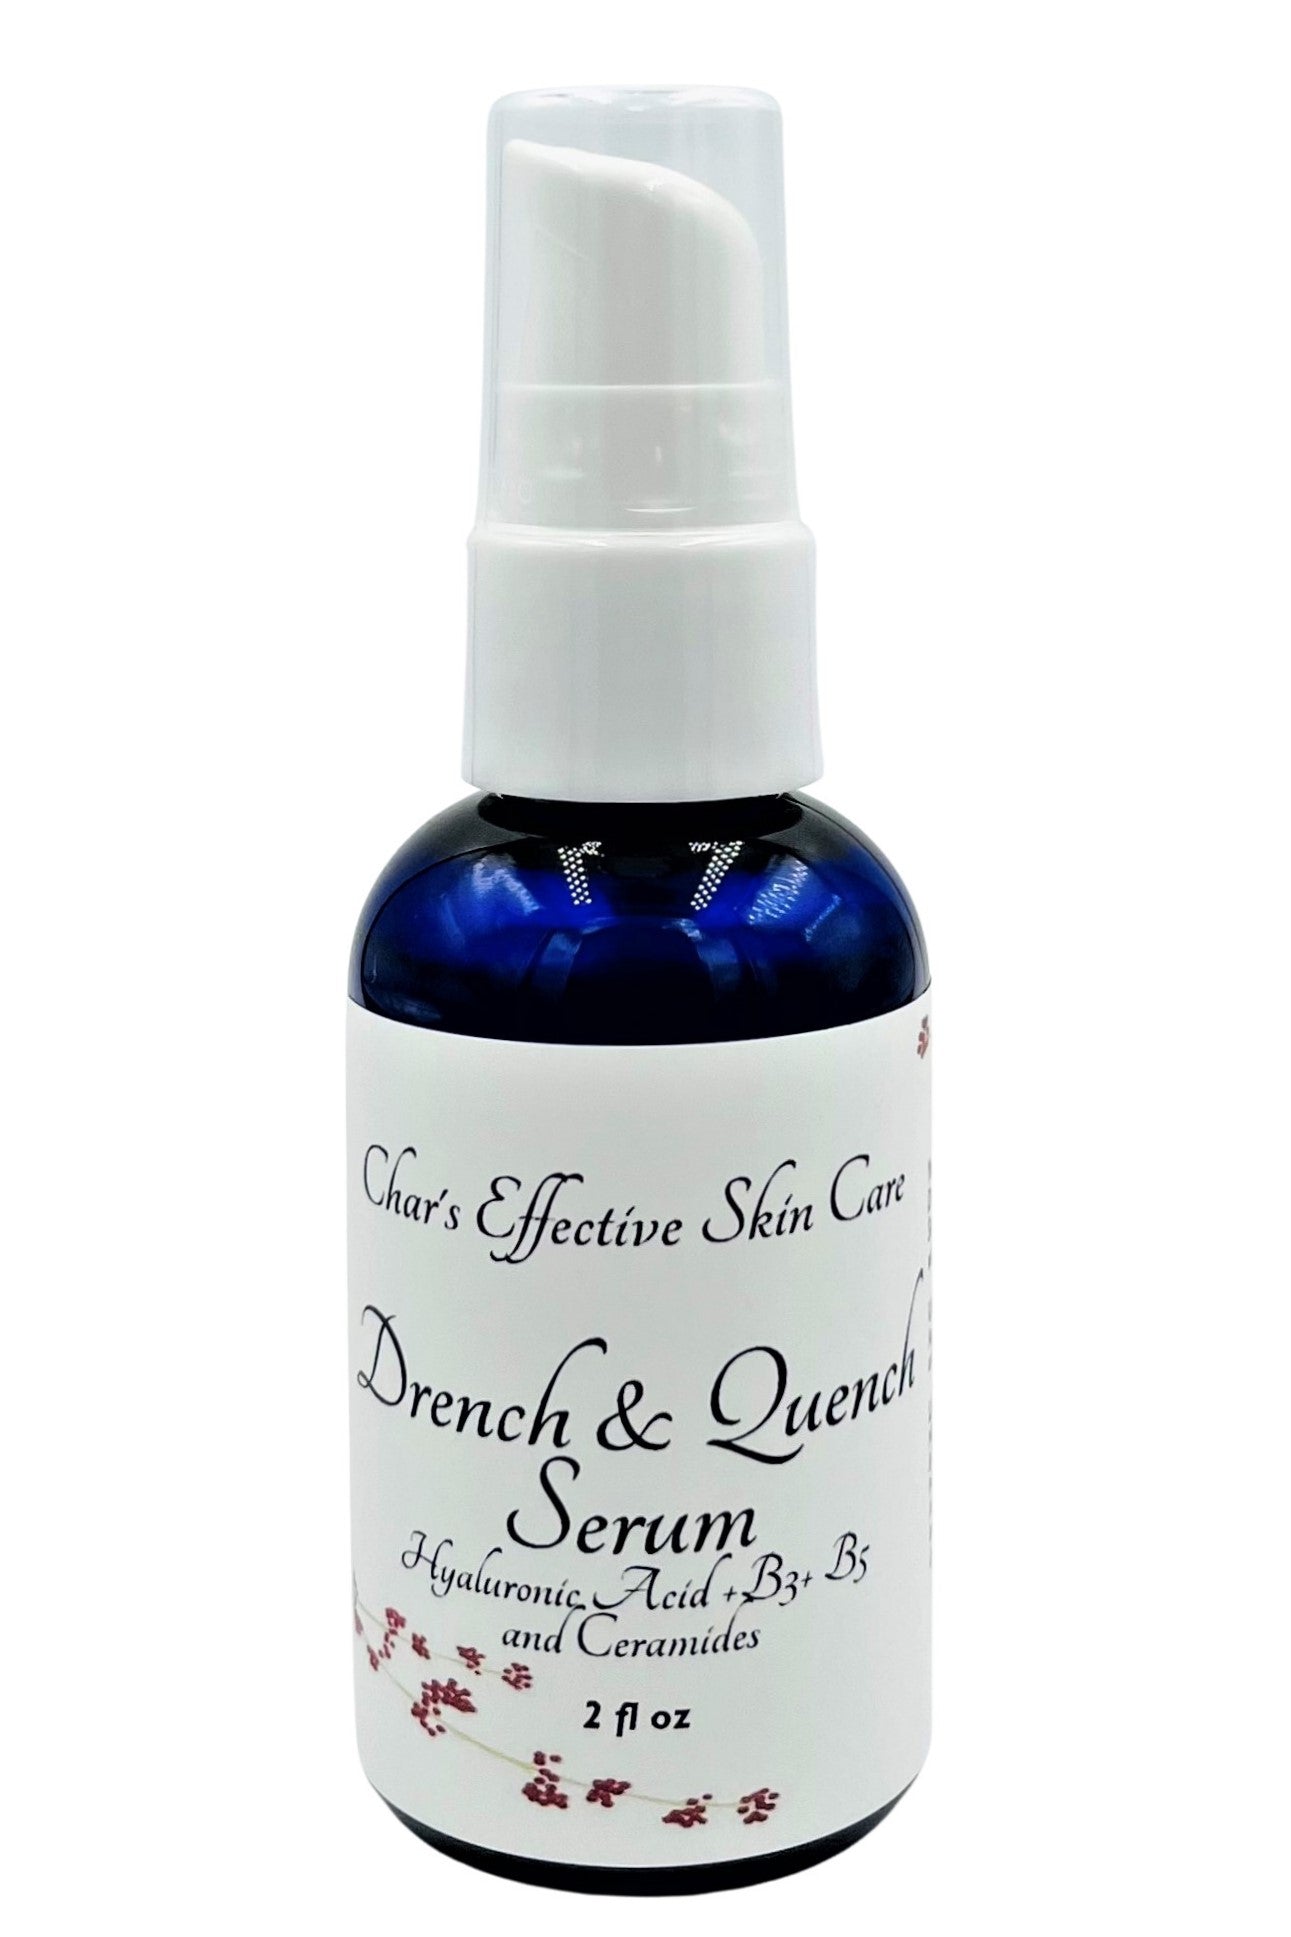 Drench & Quench Hyaluronic Serum +Ceramides+B3+B5 (2oz Size)/ Blue Bottle with Treatment Pump/2oz Size/For All Skin Types/Oil-Free Hydration/Additional Antioxidant Botanicals/Char's Effective Skin Care